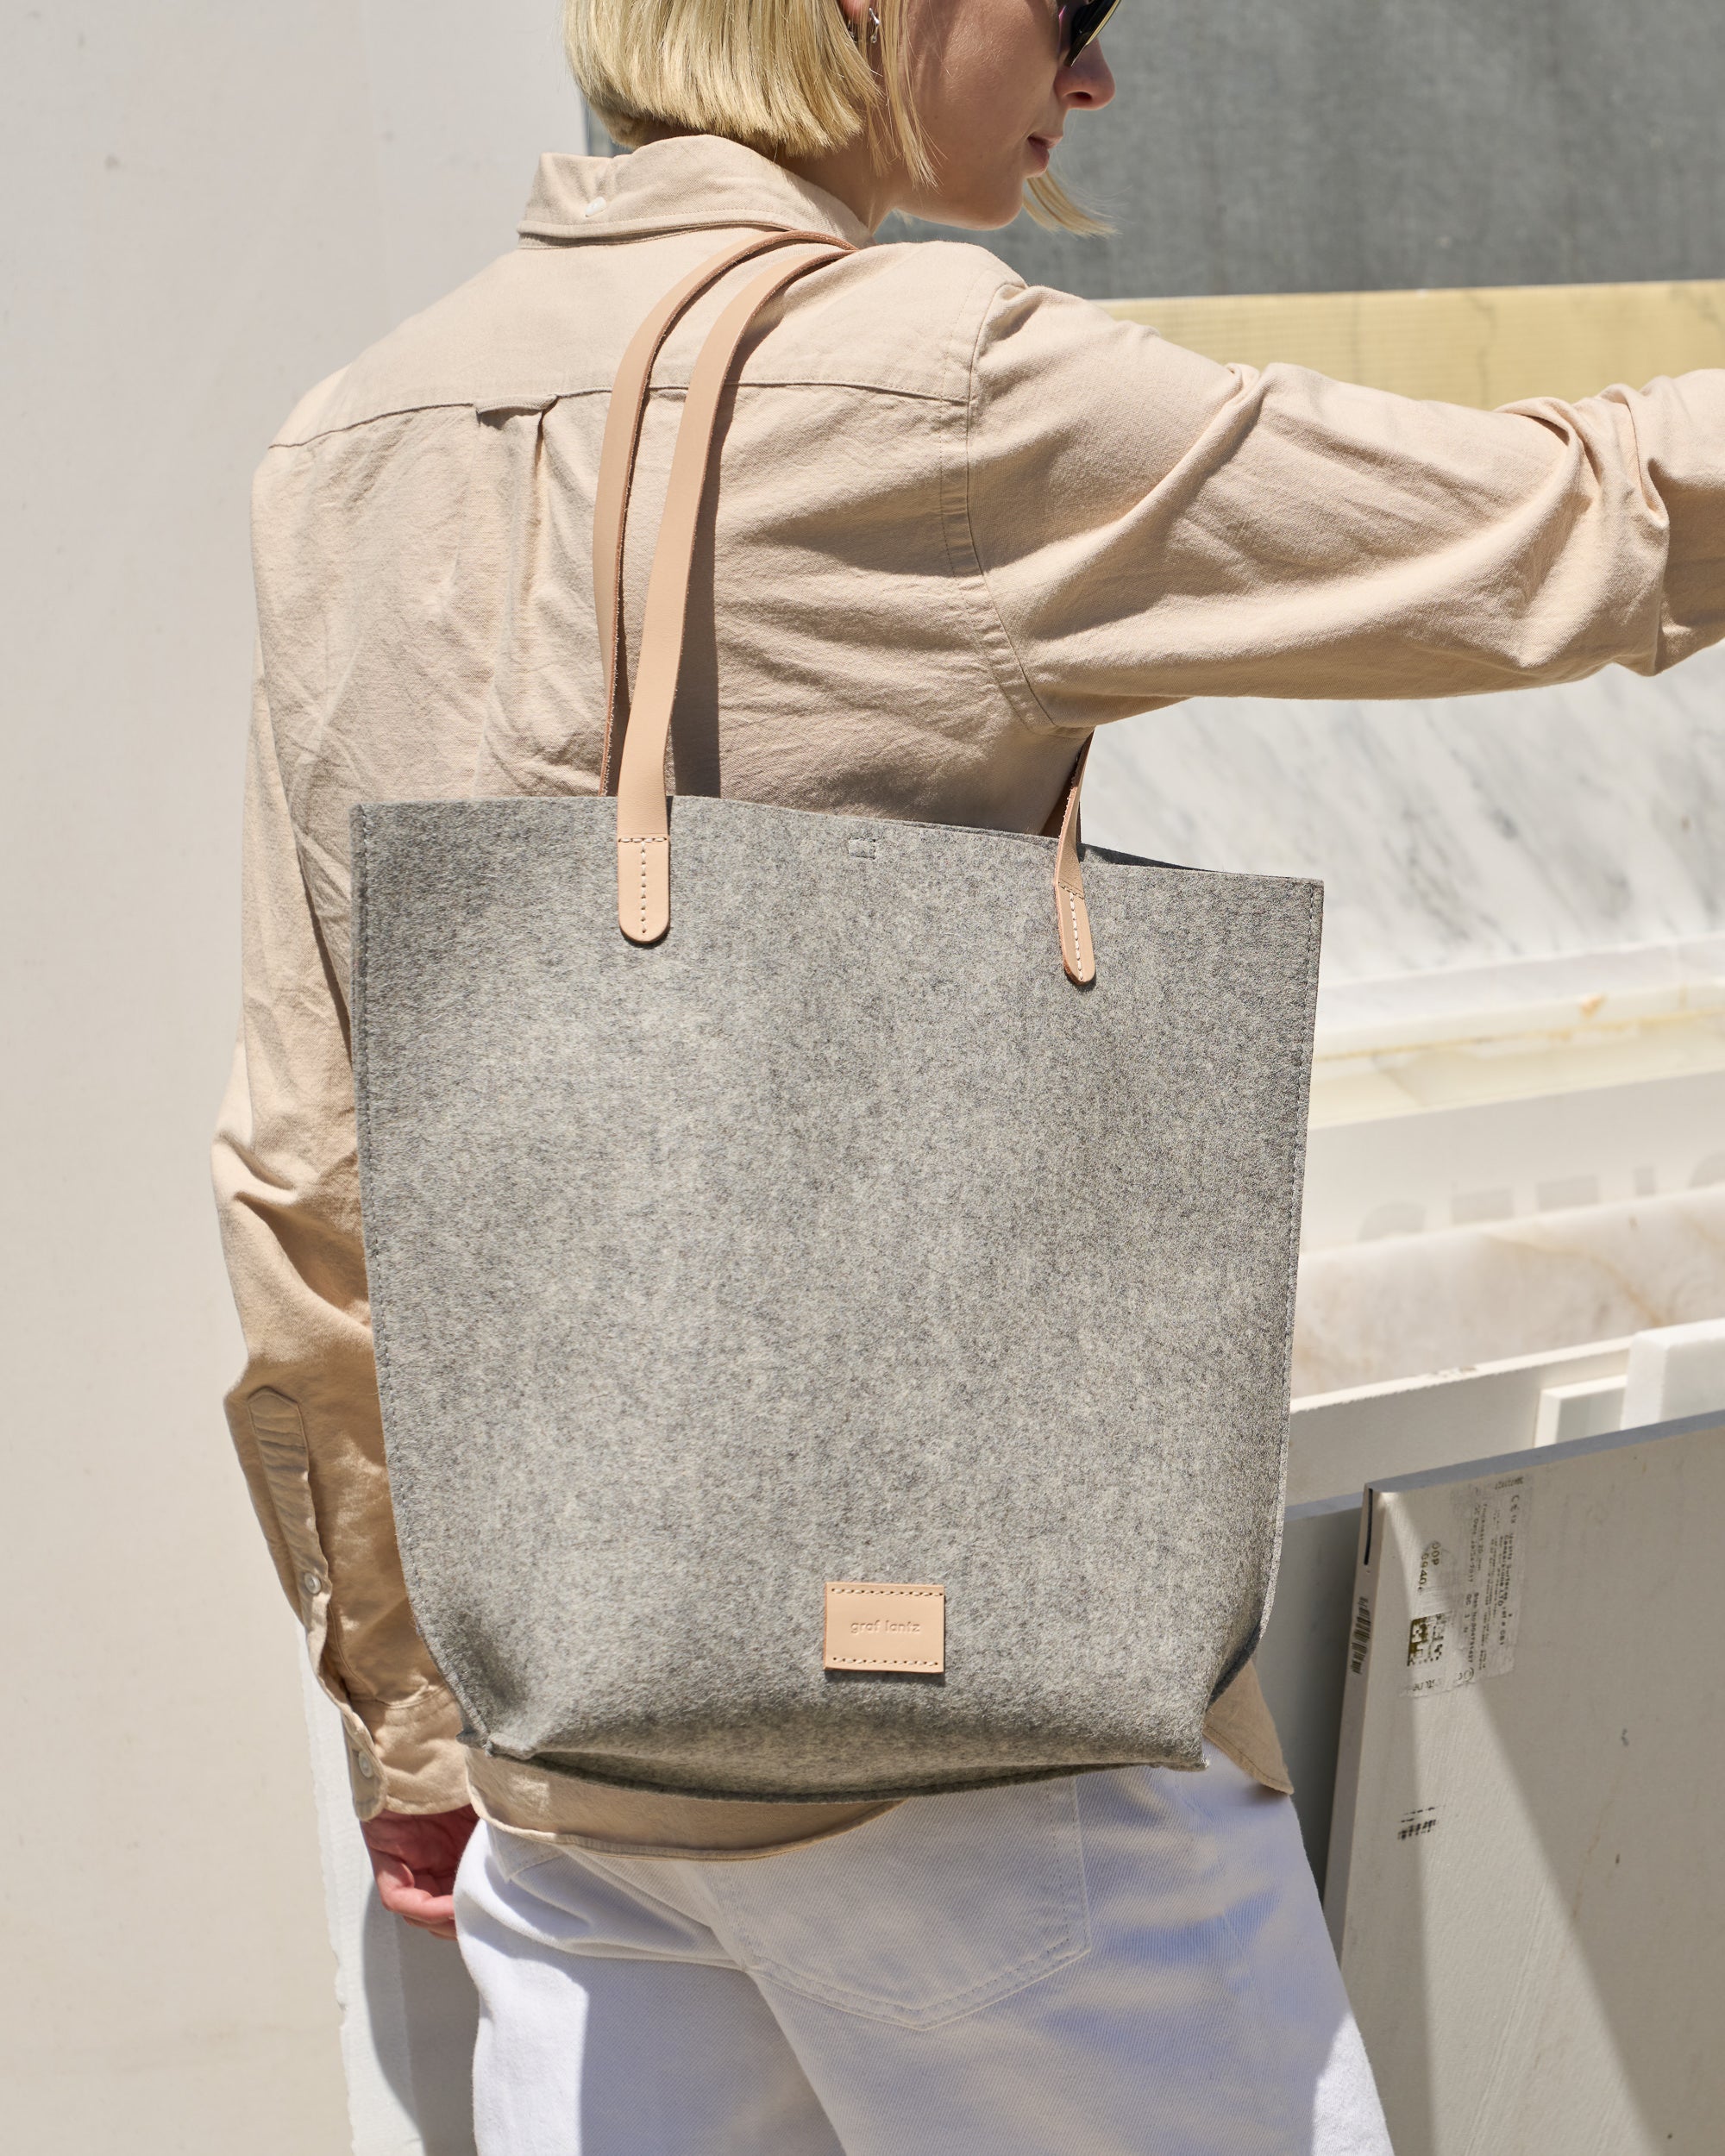 Felt Tote Bags - Made in the USA from 100% Merino Wool | Graf Lantz